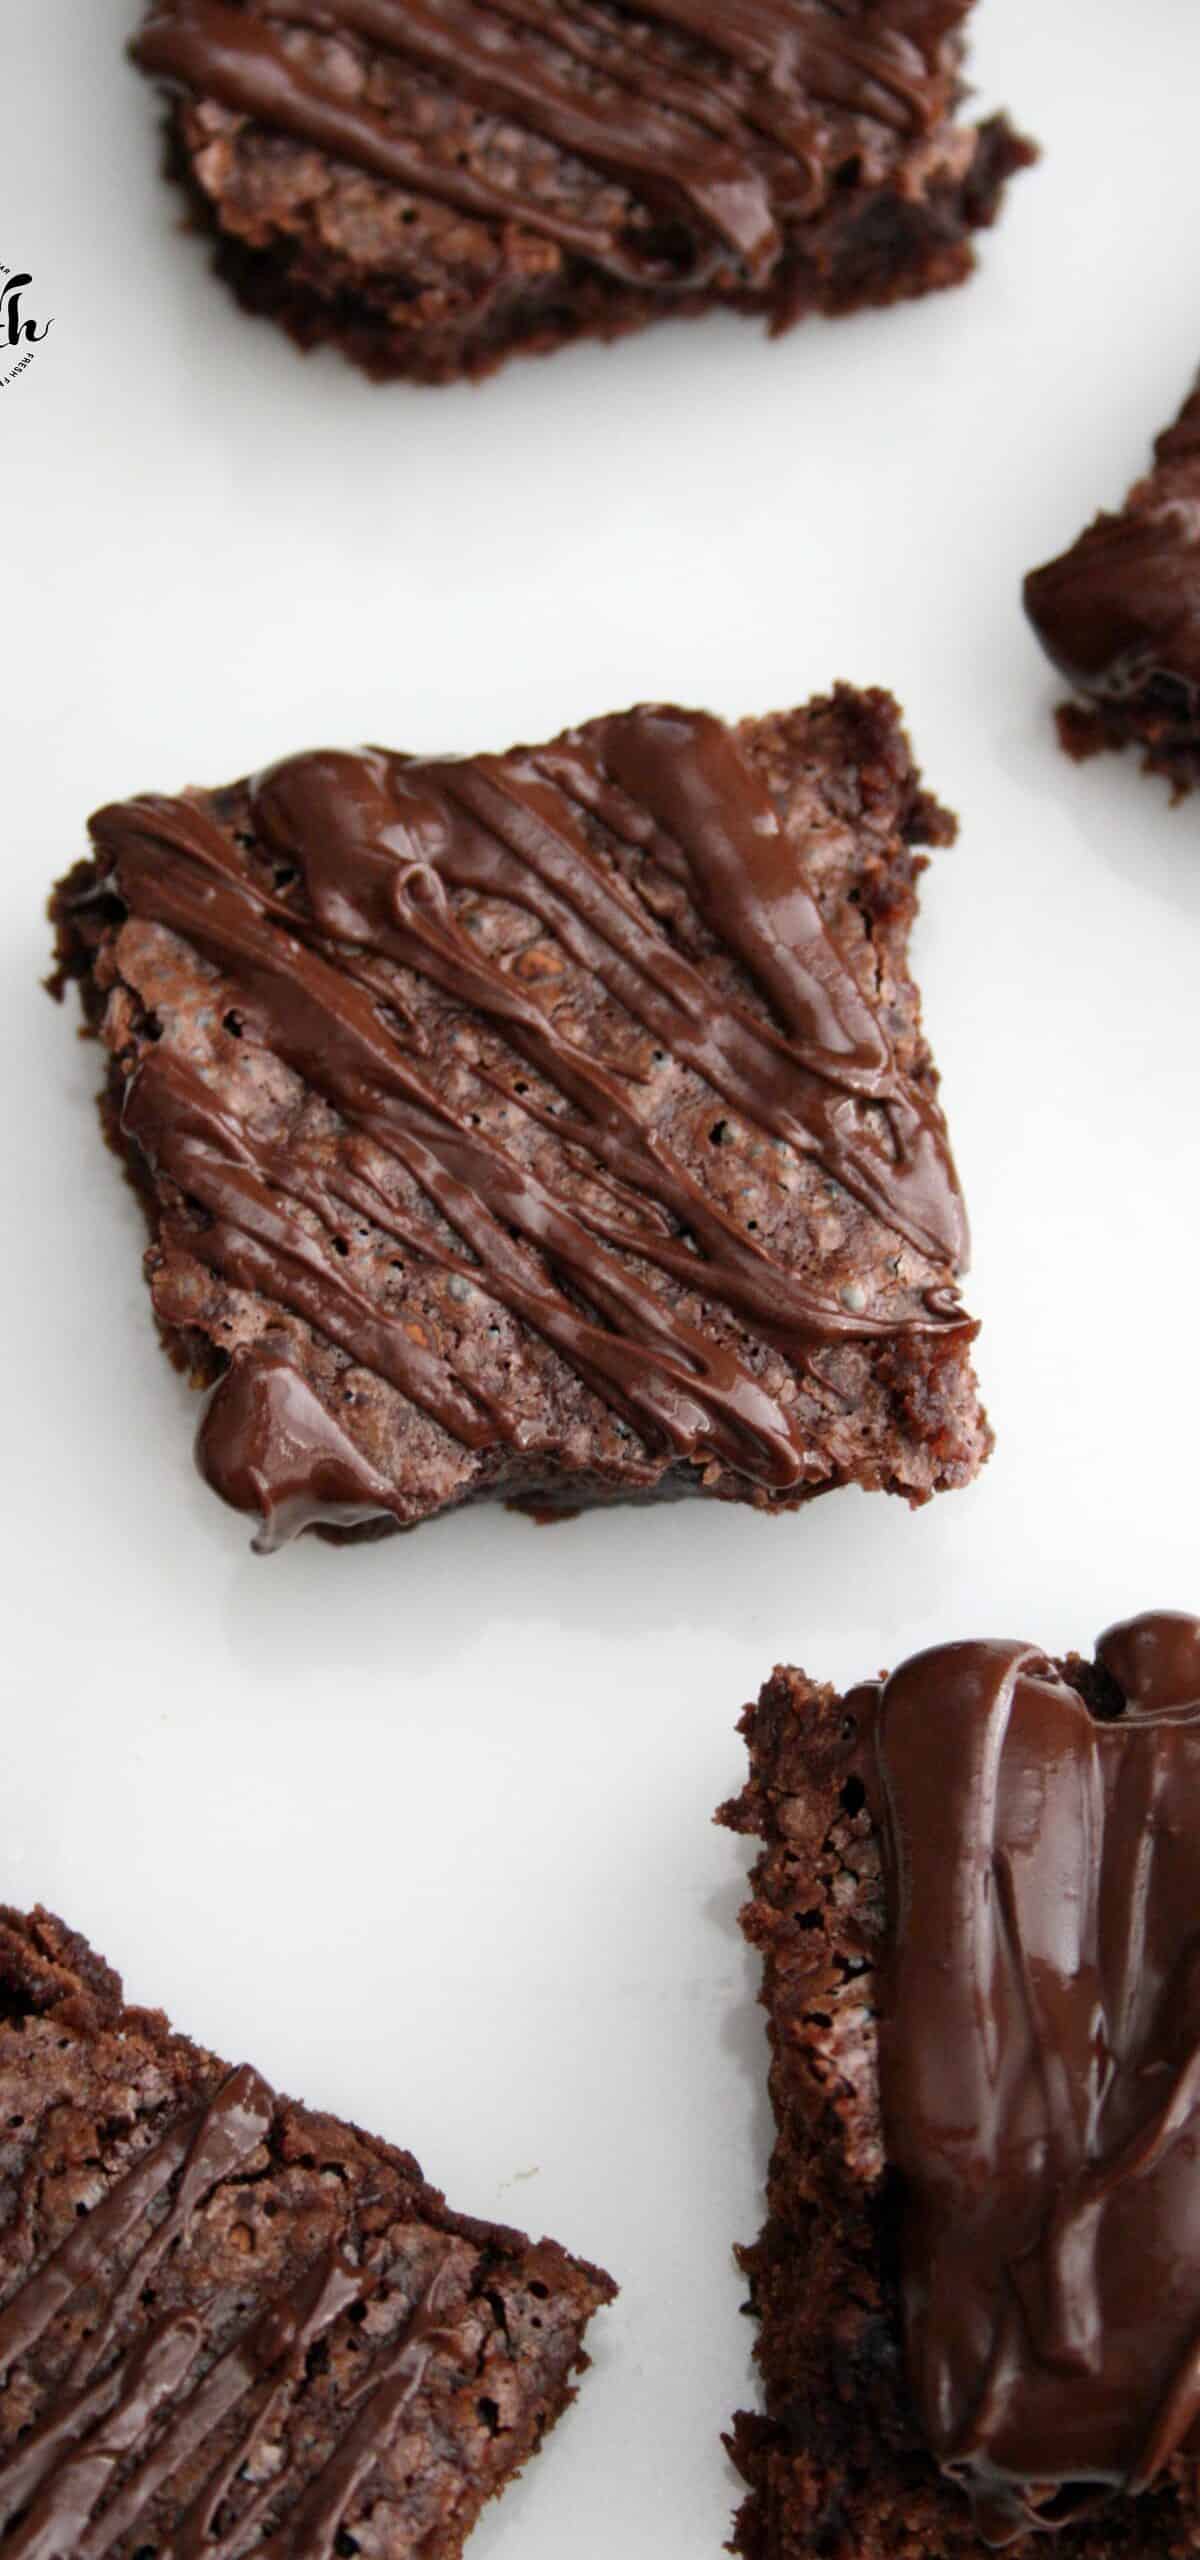  These Passover brownies are the perfect sweet treat for the holiday.